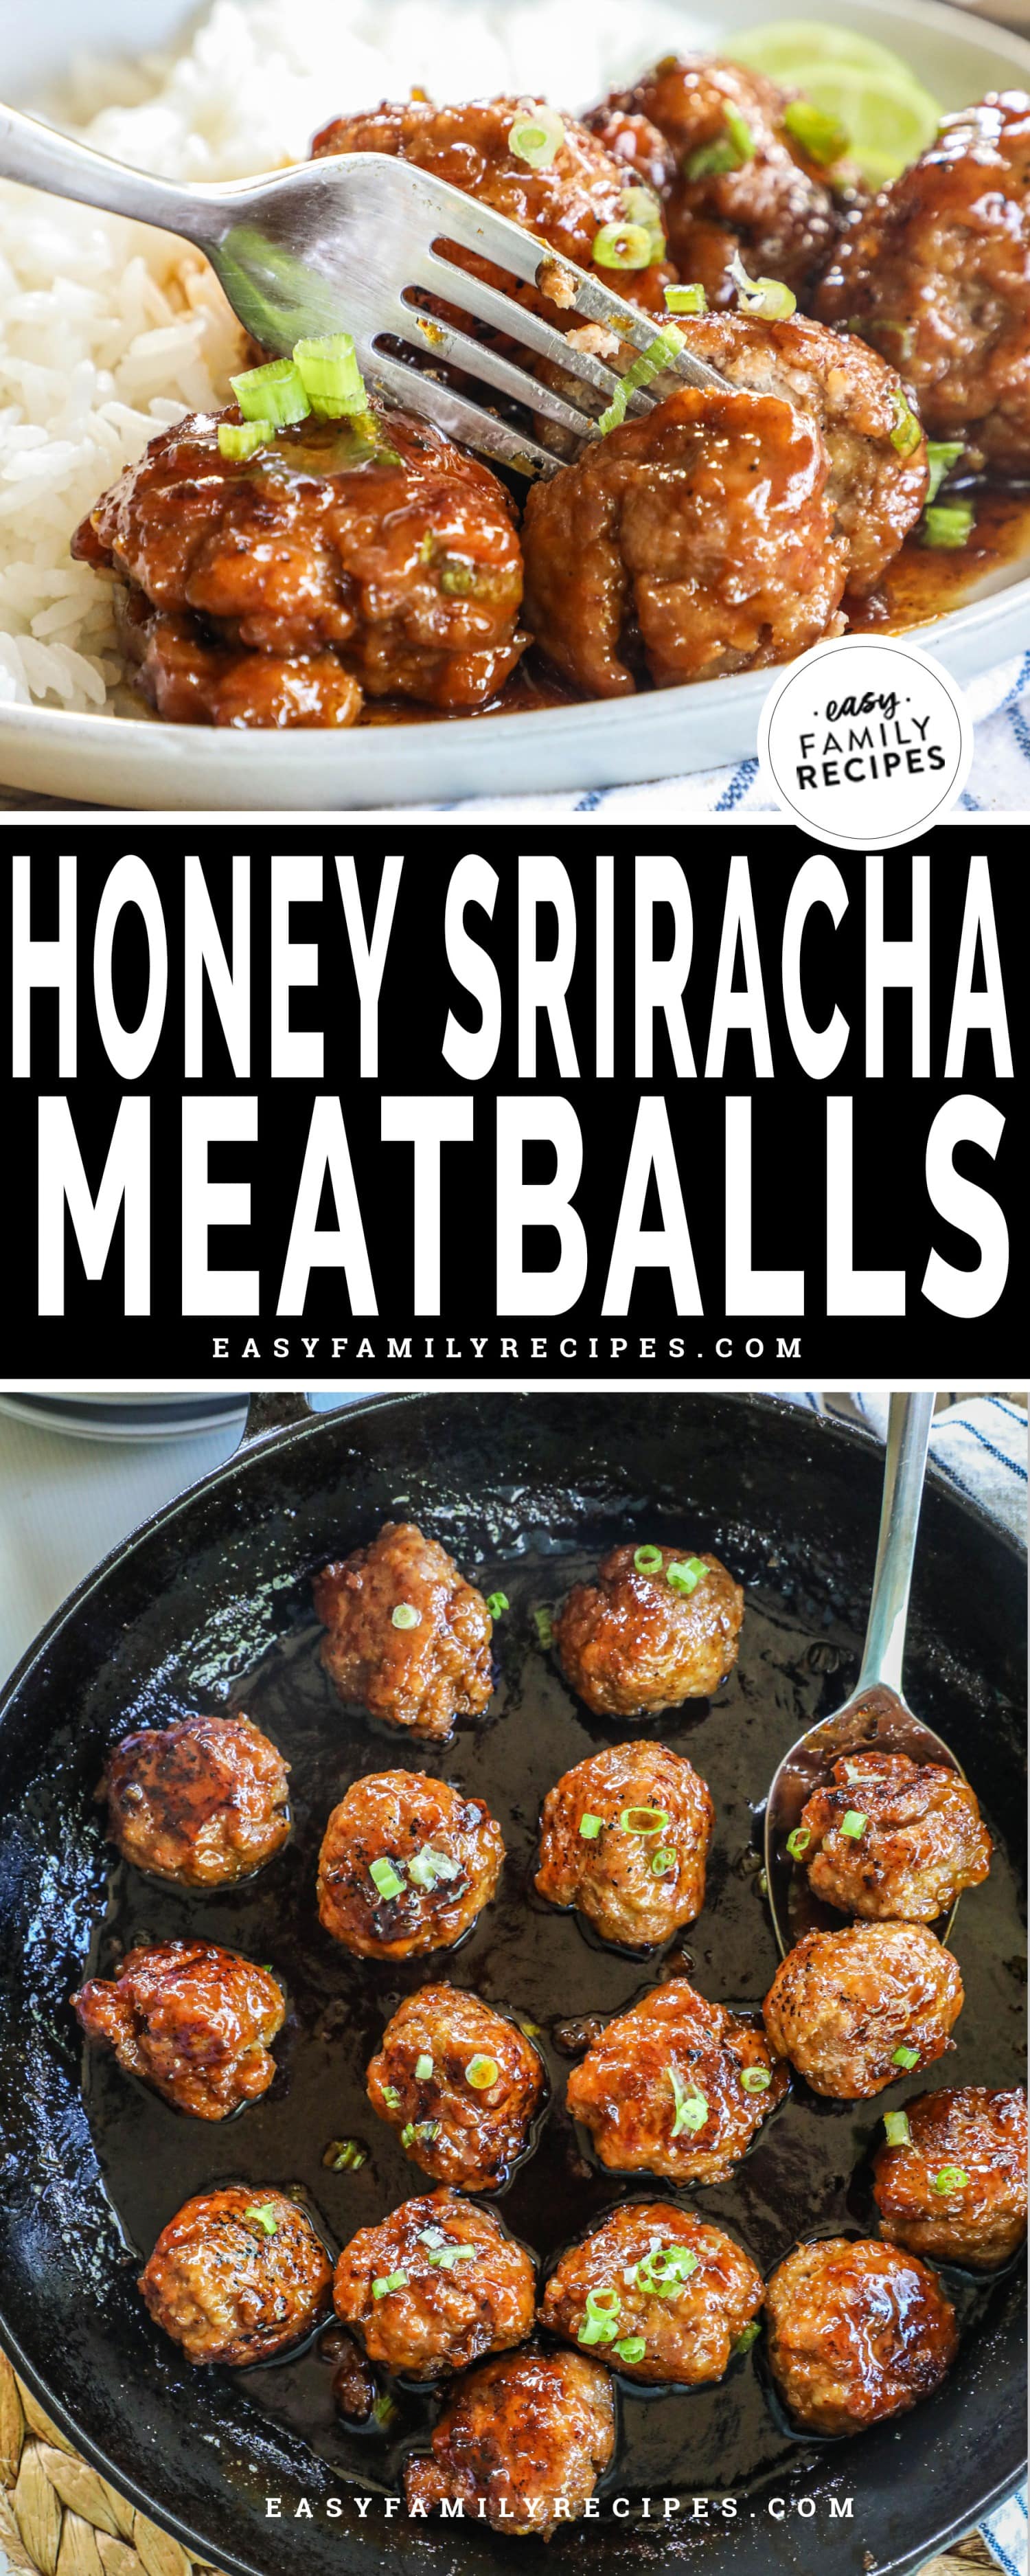 Top photo: Fork cutting into tender honey sriracha meatball on plate, Bottom photo: Spoon picking up meatballs from skillet